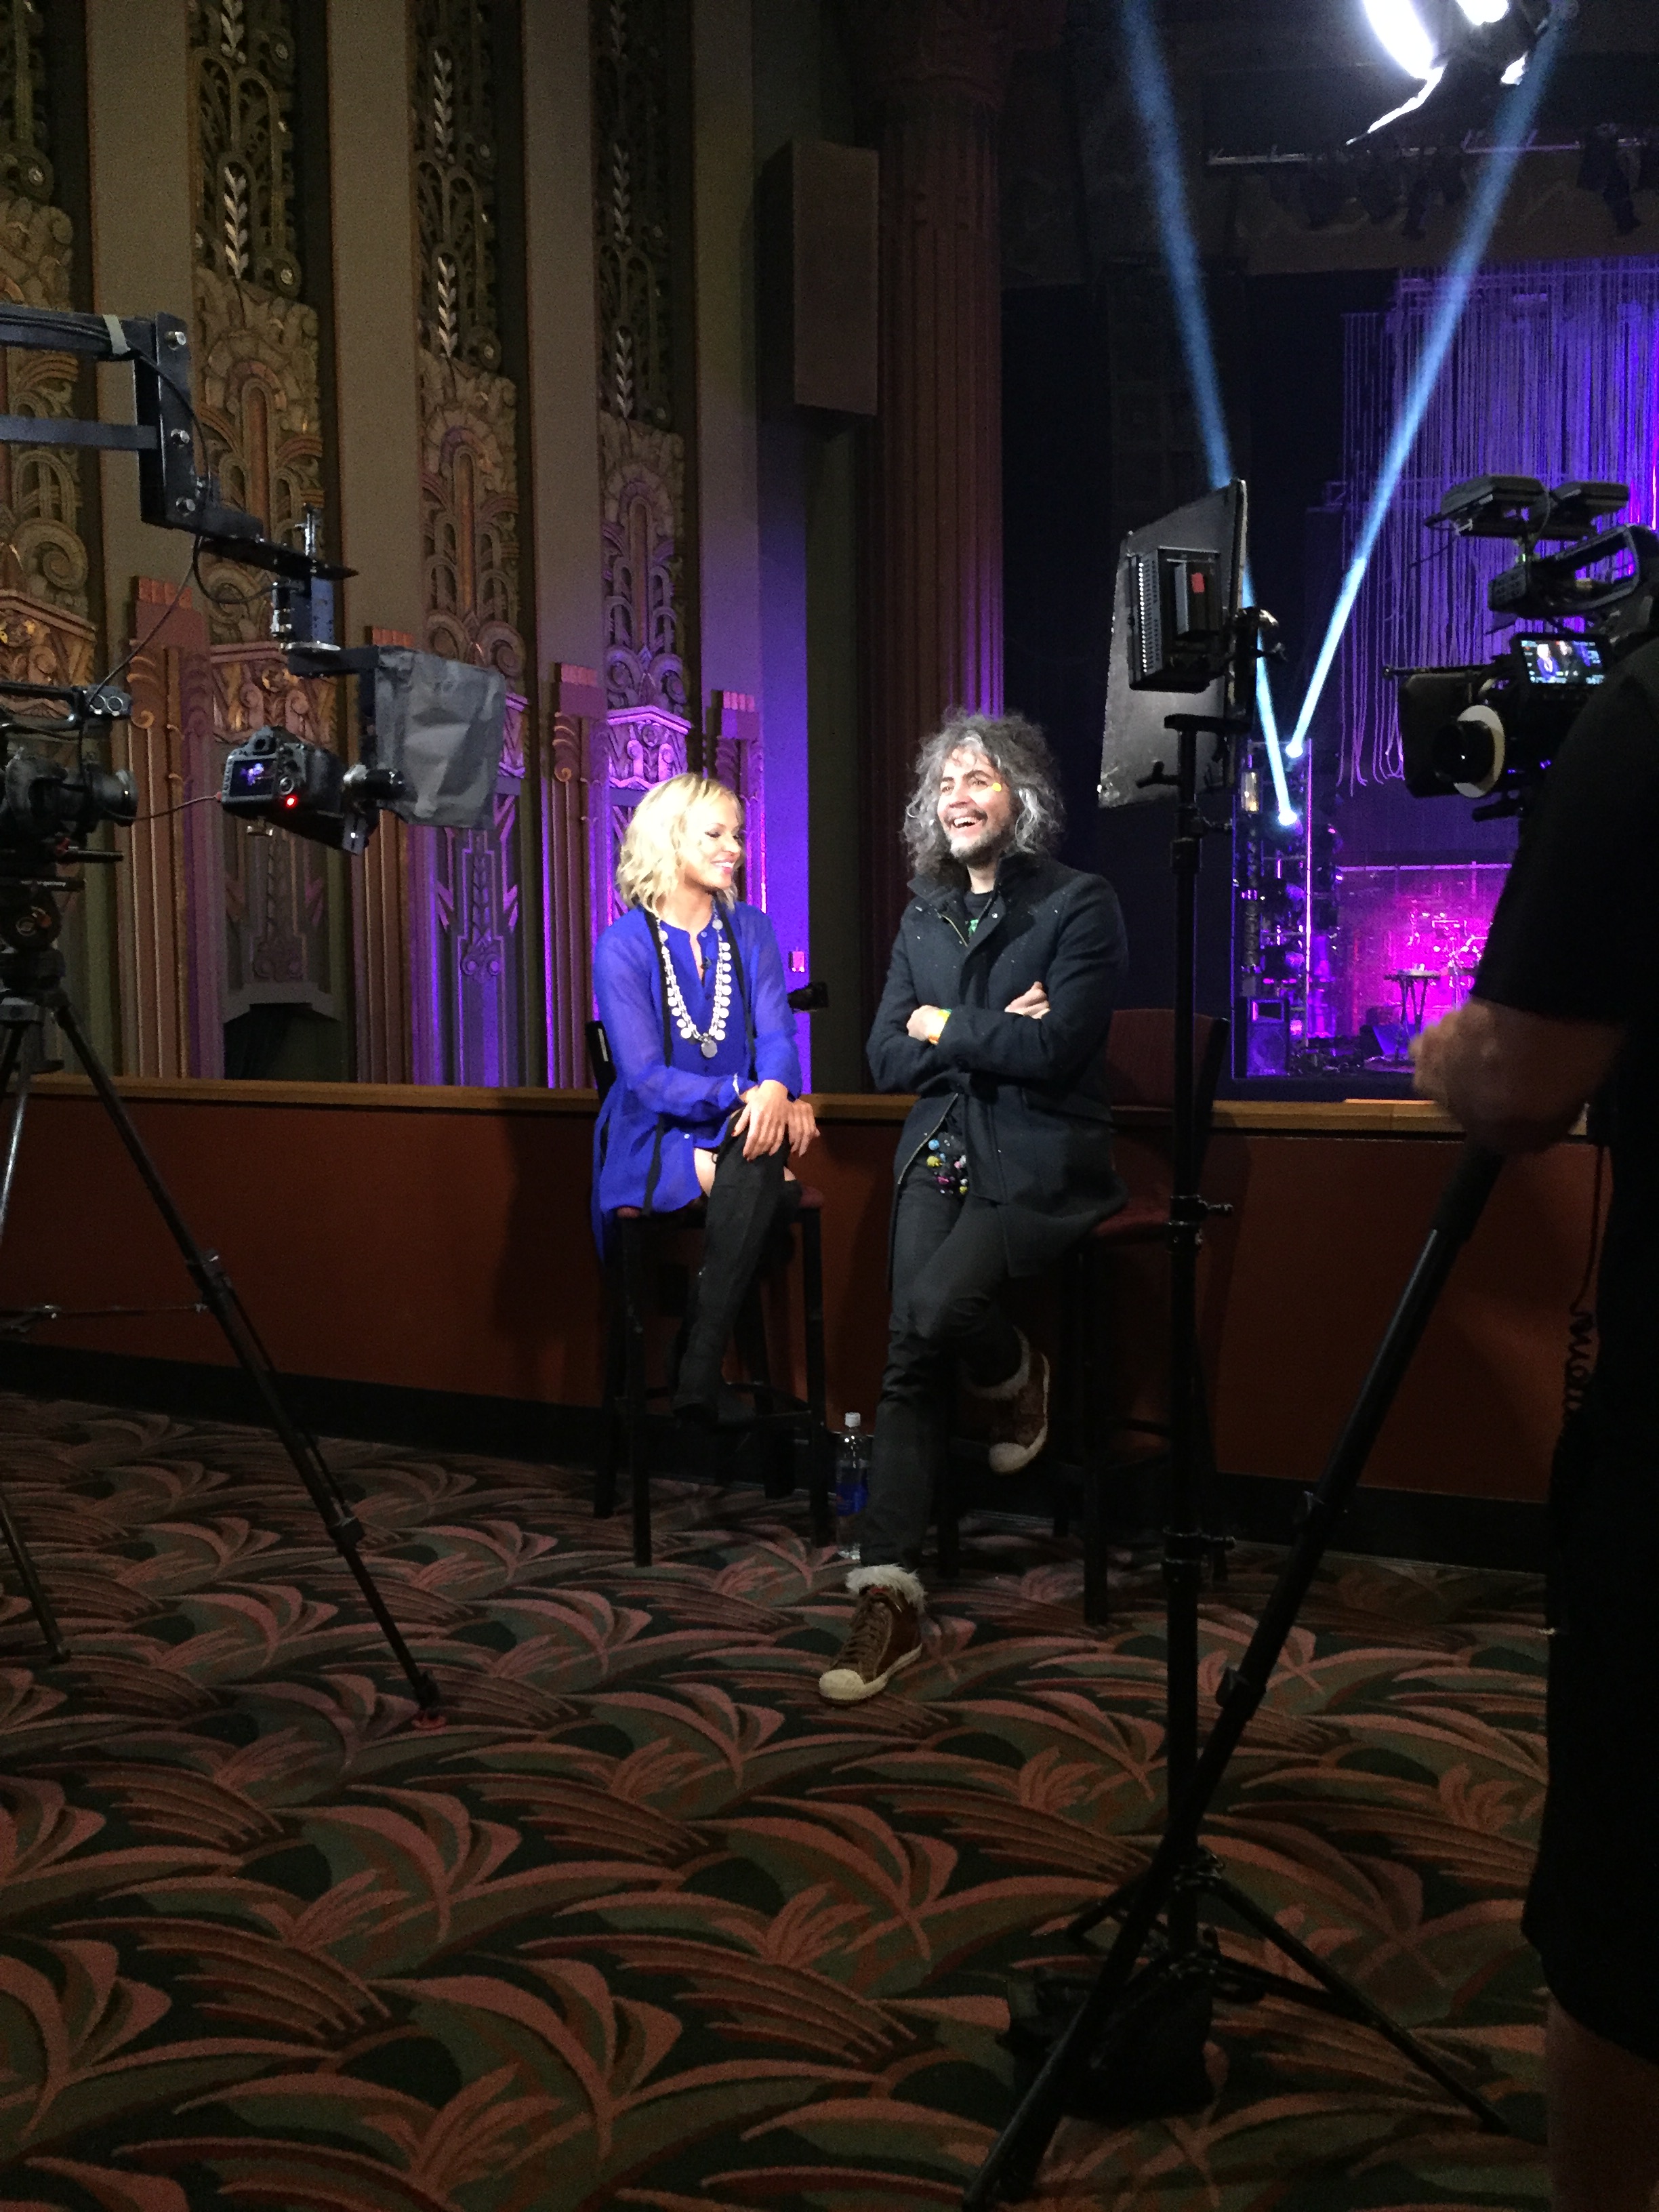 Interview with Wayne Coyne, founder of the Flaming Lips, on his last stop with Miley Cyrus on the Dead Petz tour for Lexus Night Out music special